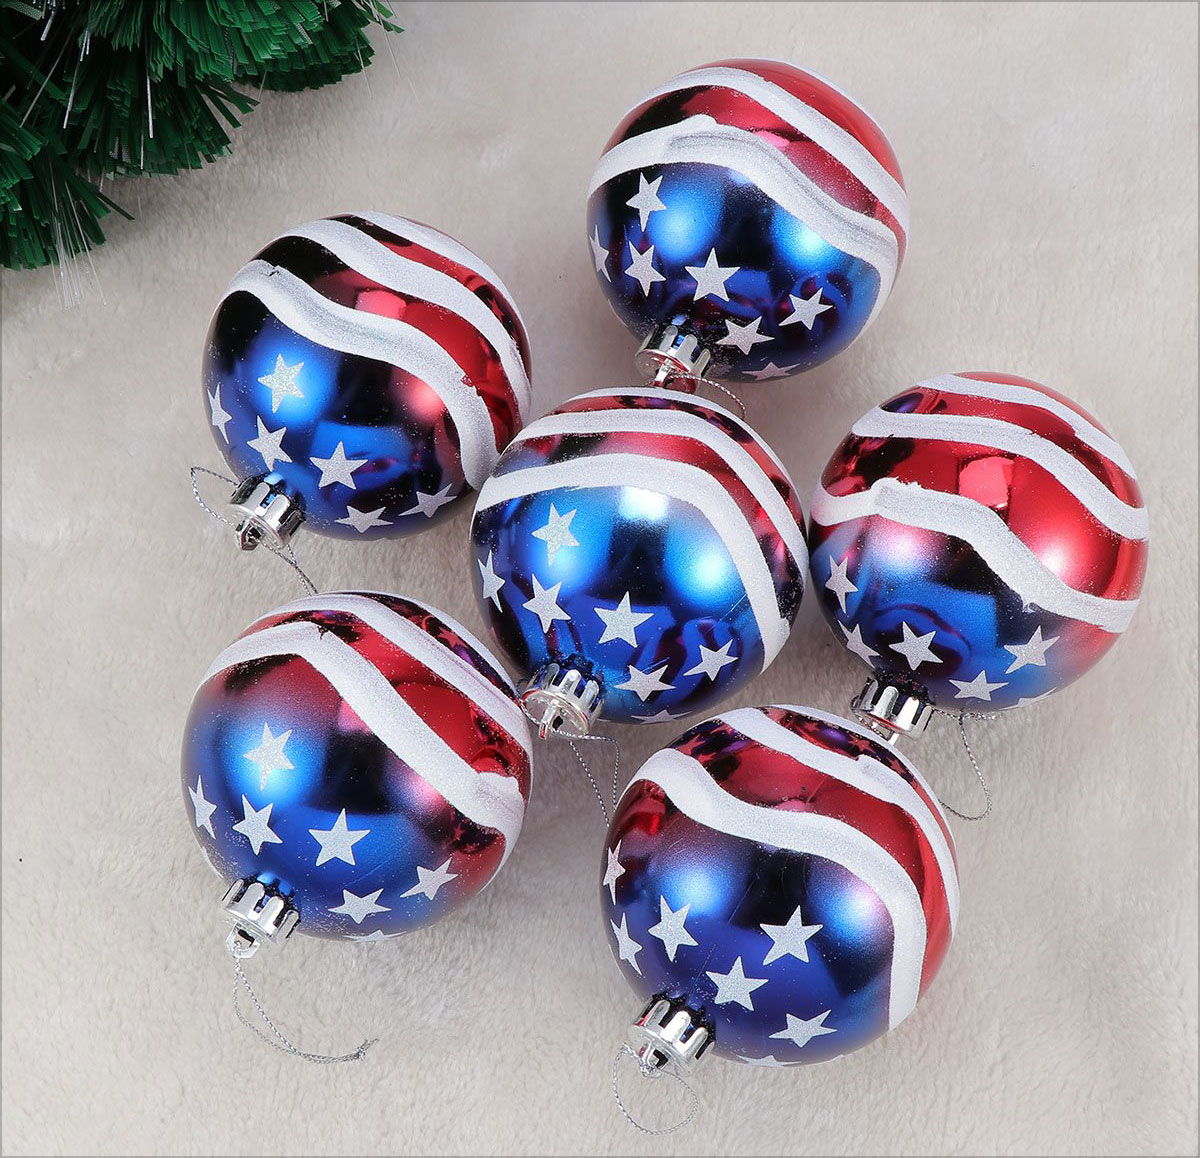 20 Best 4th of July Decorations 2019 | Indoor & Outdoor Collection ...